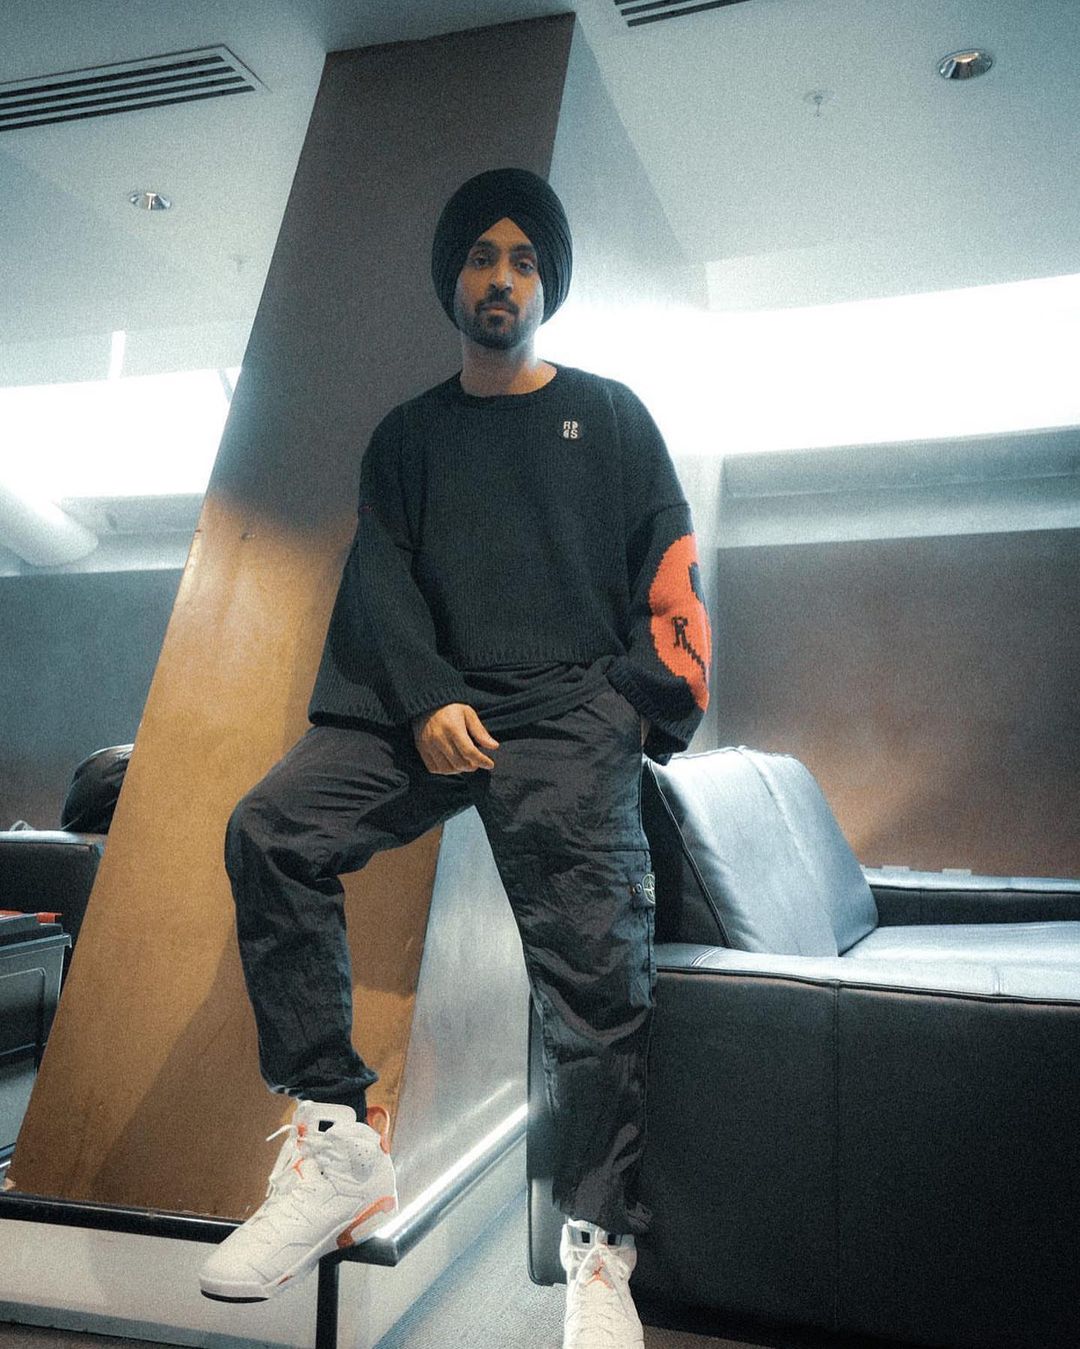 Diljit Dosanjh Fans, Did You Know He's Not Only Married But Also A Father  To A Beautiful Son?